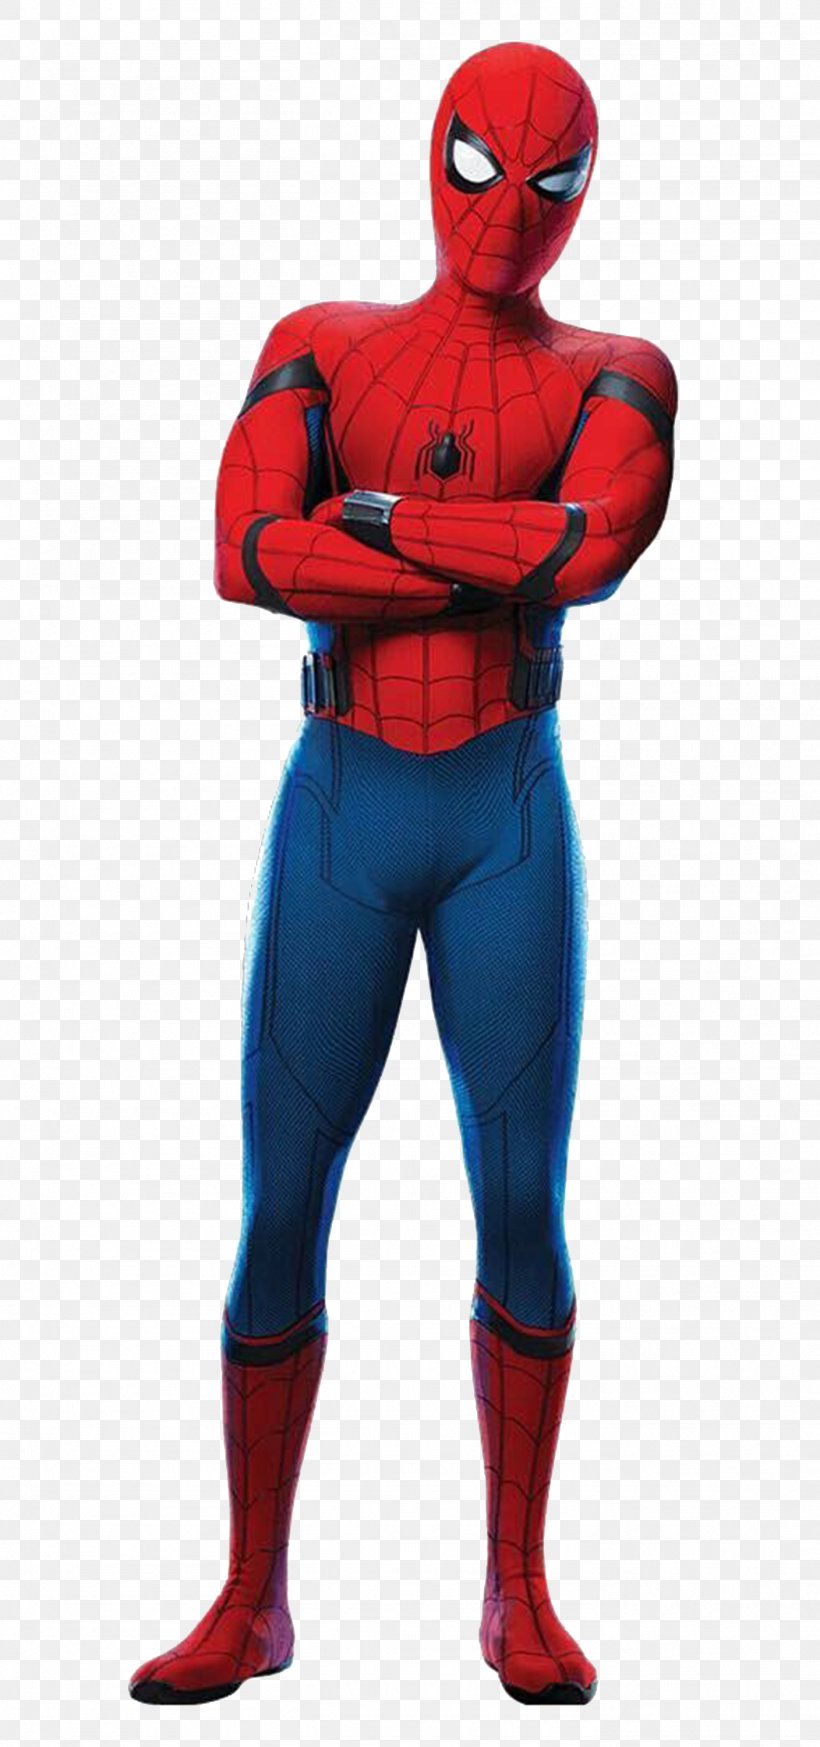 Spider-Man: Homecoming Film Series Hoodie Marvel Cinematic Universe Costume, PNG, 1408x3000px, Spiderman, Action Figure, Costume, Electric Blue, Fictional Character Download Free